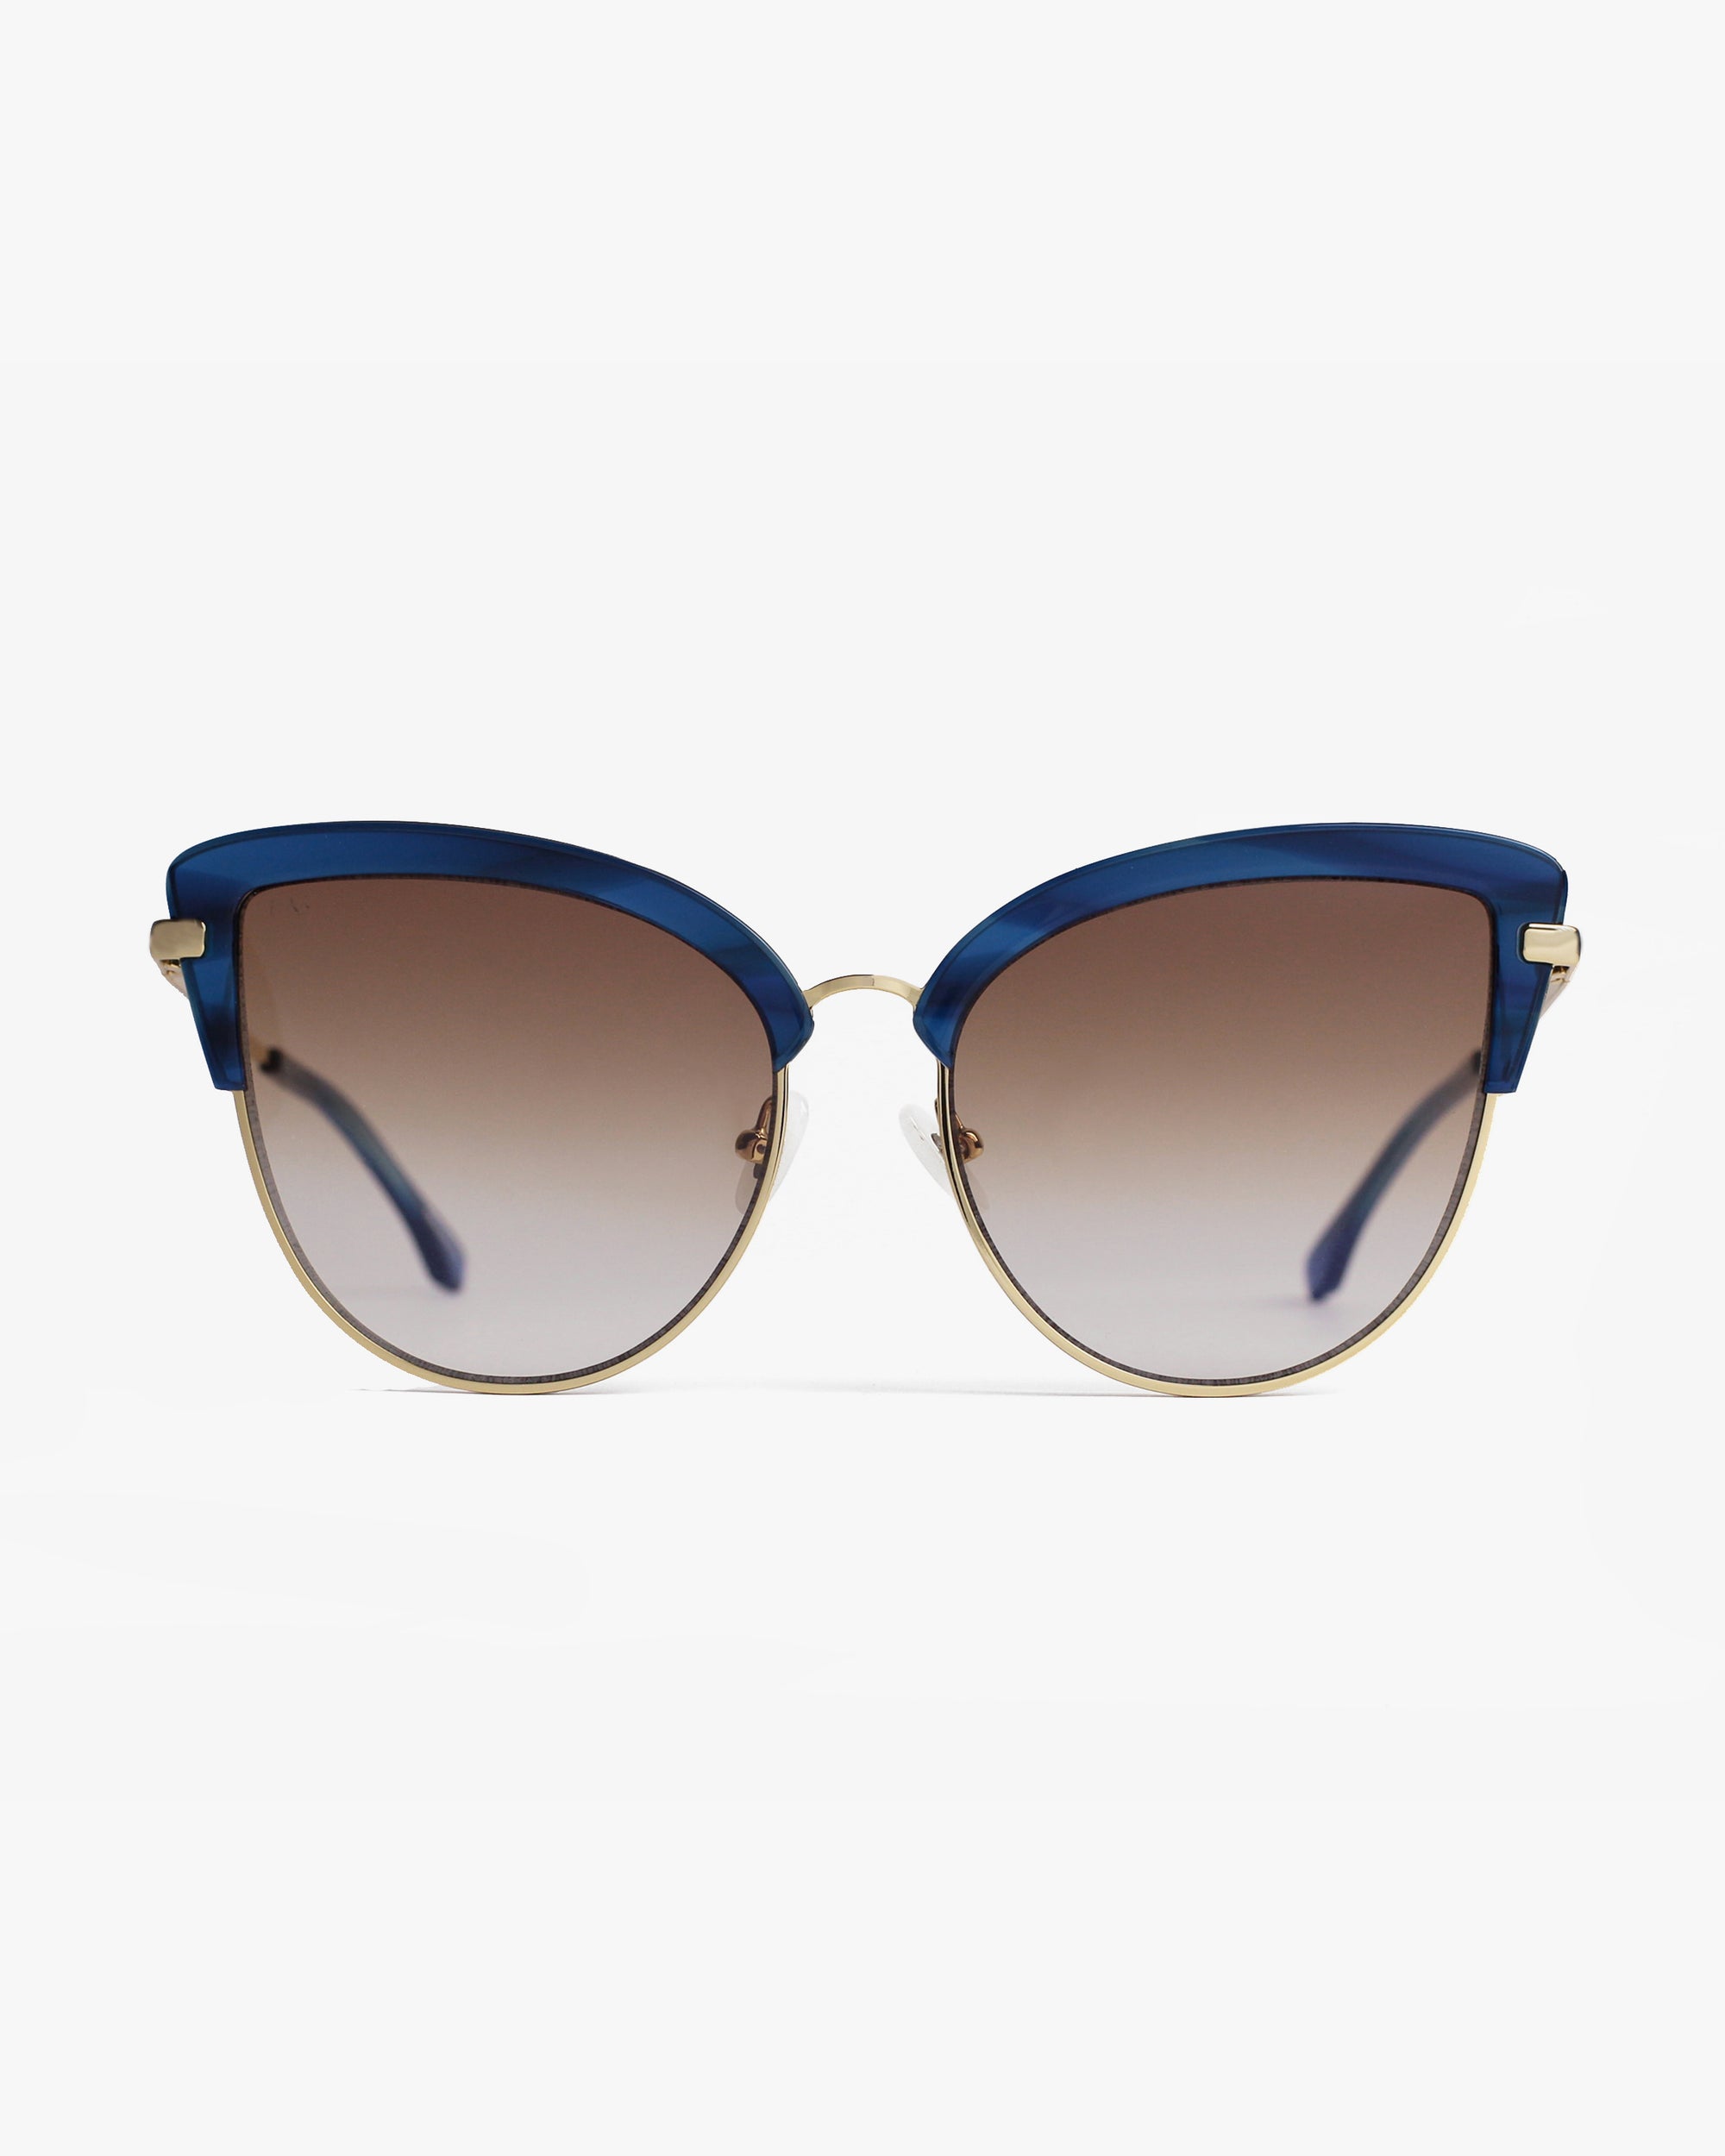 A pair of stylish cat-eye Venus sunglasses by For Art&#39;s Sake® with 18-karat gold plated frames and blue accents along the top. The nylon lenses are gradient, transitioning from dark at the top to lighter at the bottom. The sunglasses are placed against a plain white background.